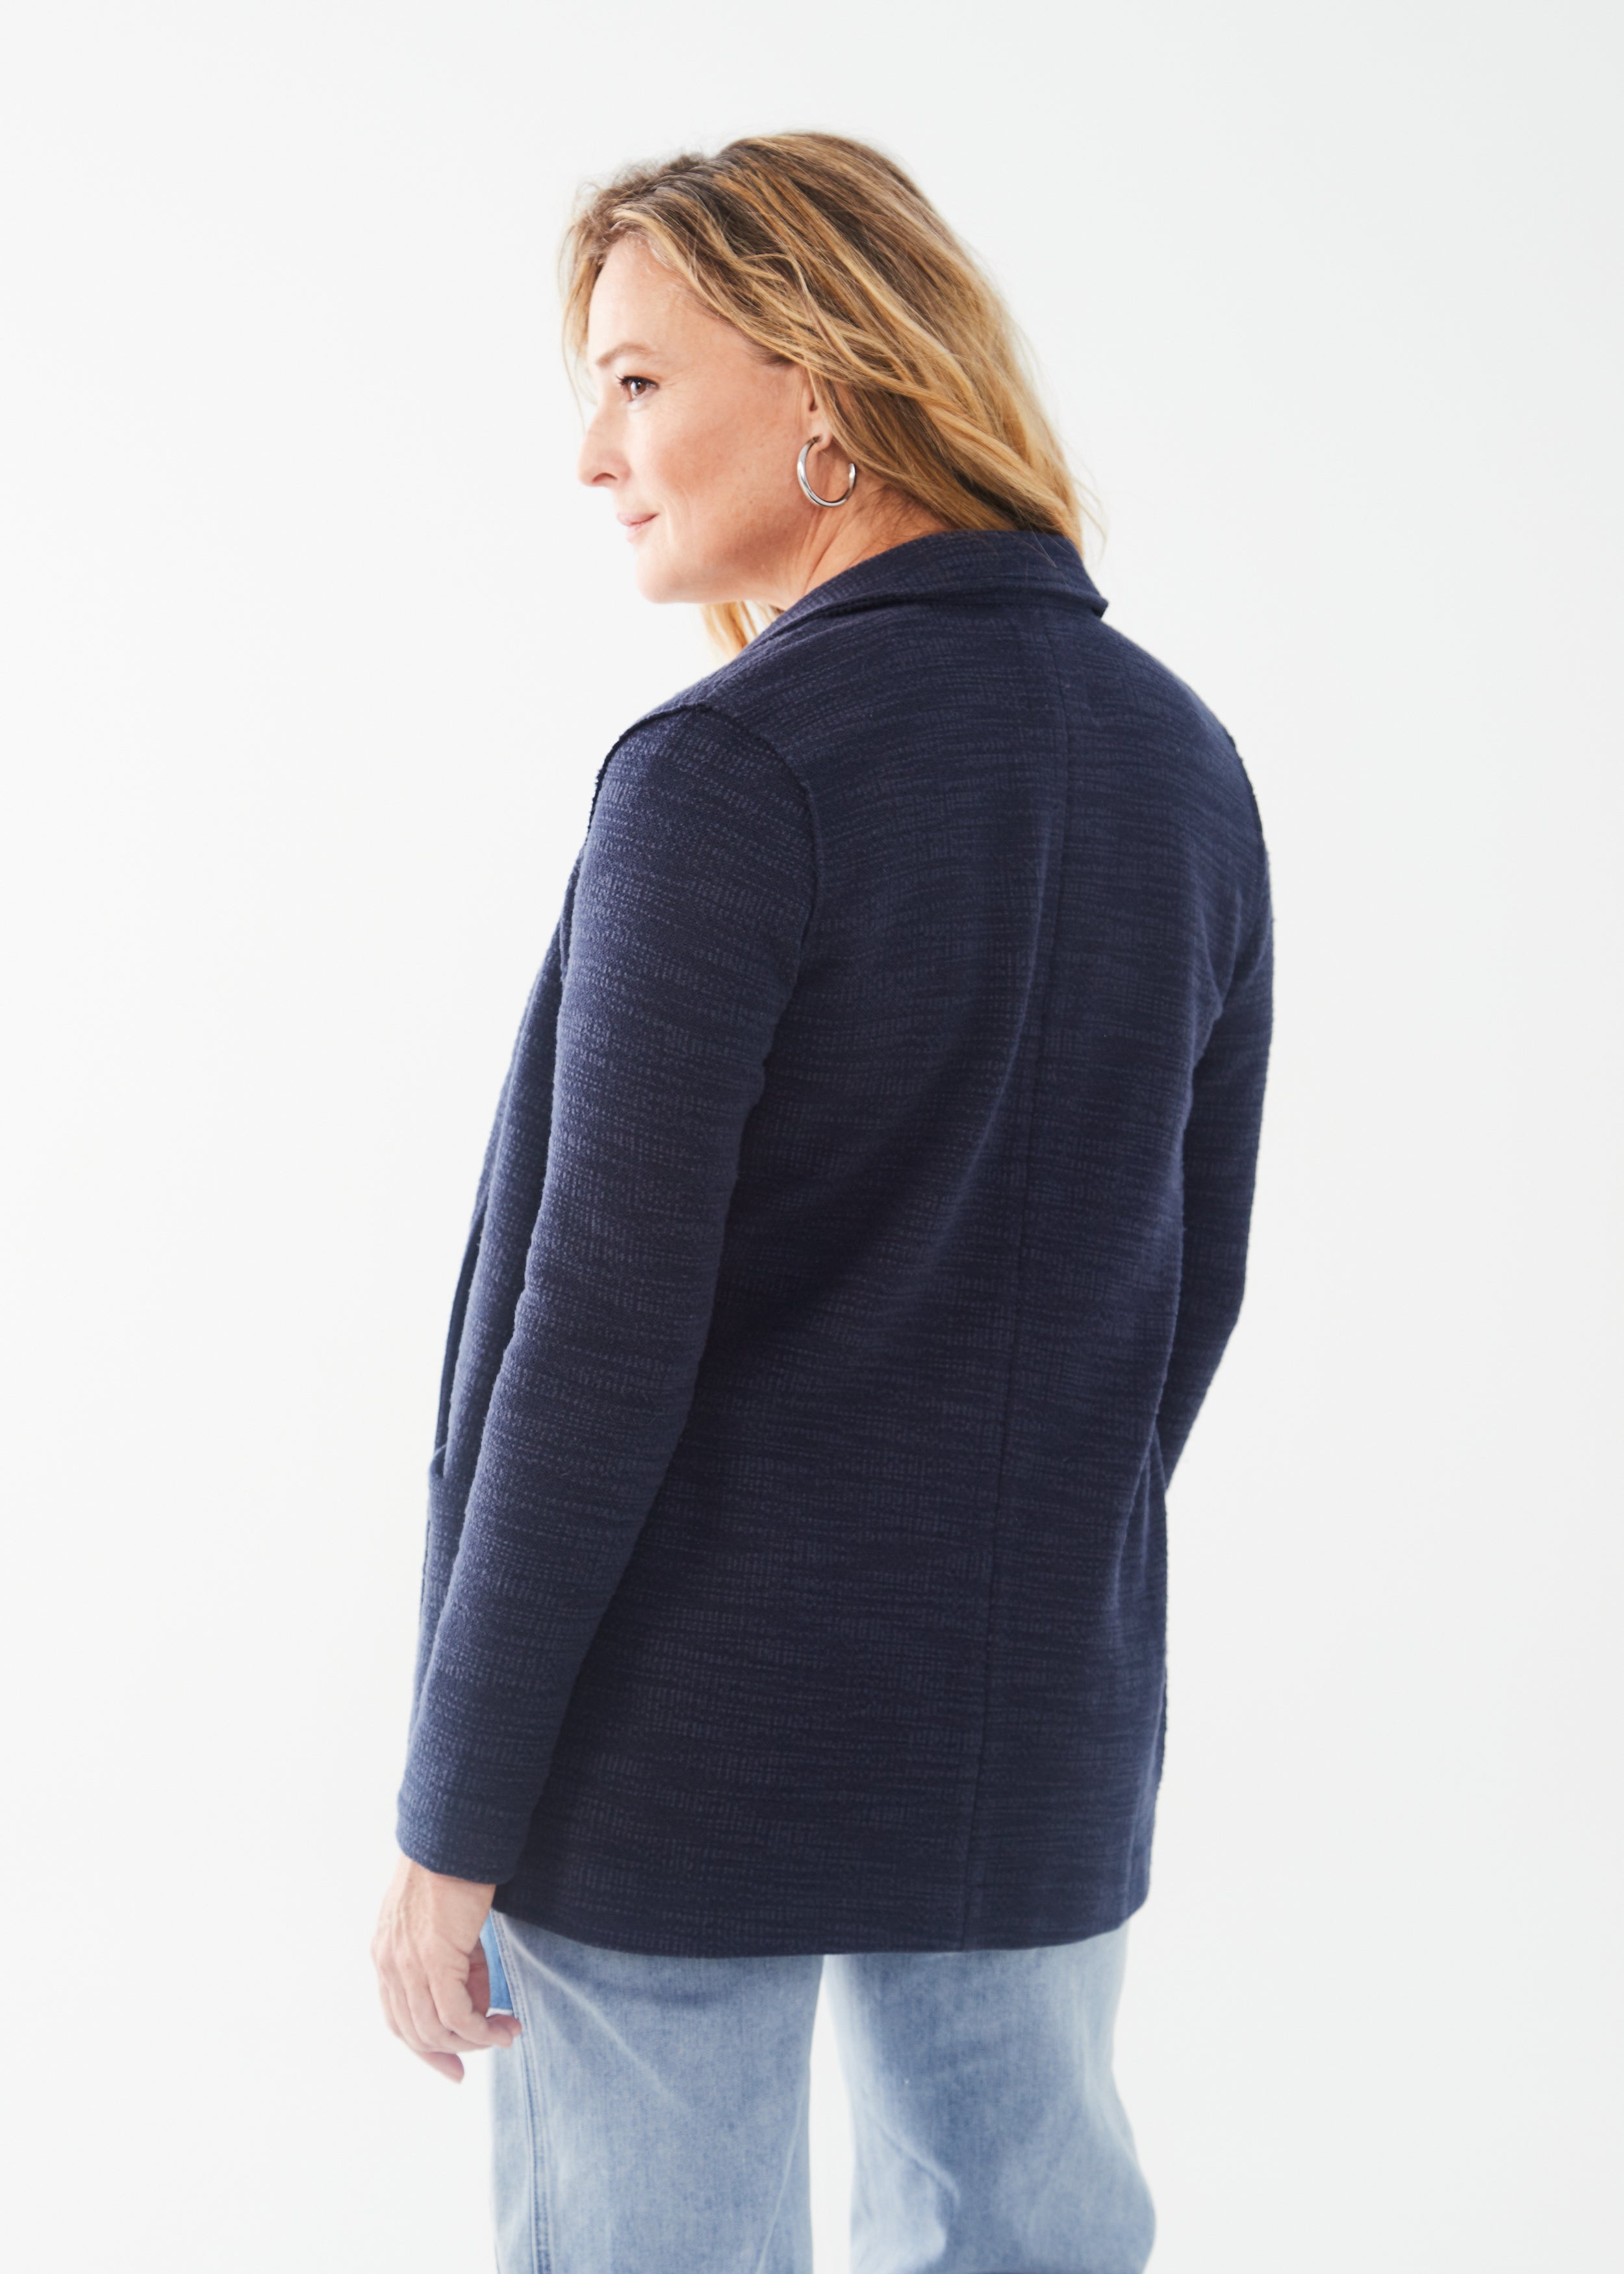 Crafted with a soft structure, the FDJ Knit Blazer in navy offers a tailored yet comfortable fit. Featuring a one button closure and deep, functional front pockets, this blazer is perfect for all-day wear. Elevate your style and confidence with this versatile and stylish blazer.